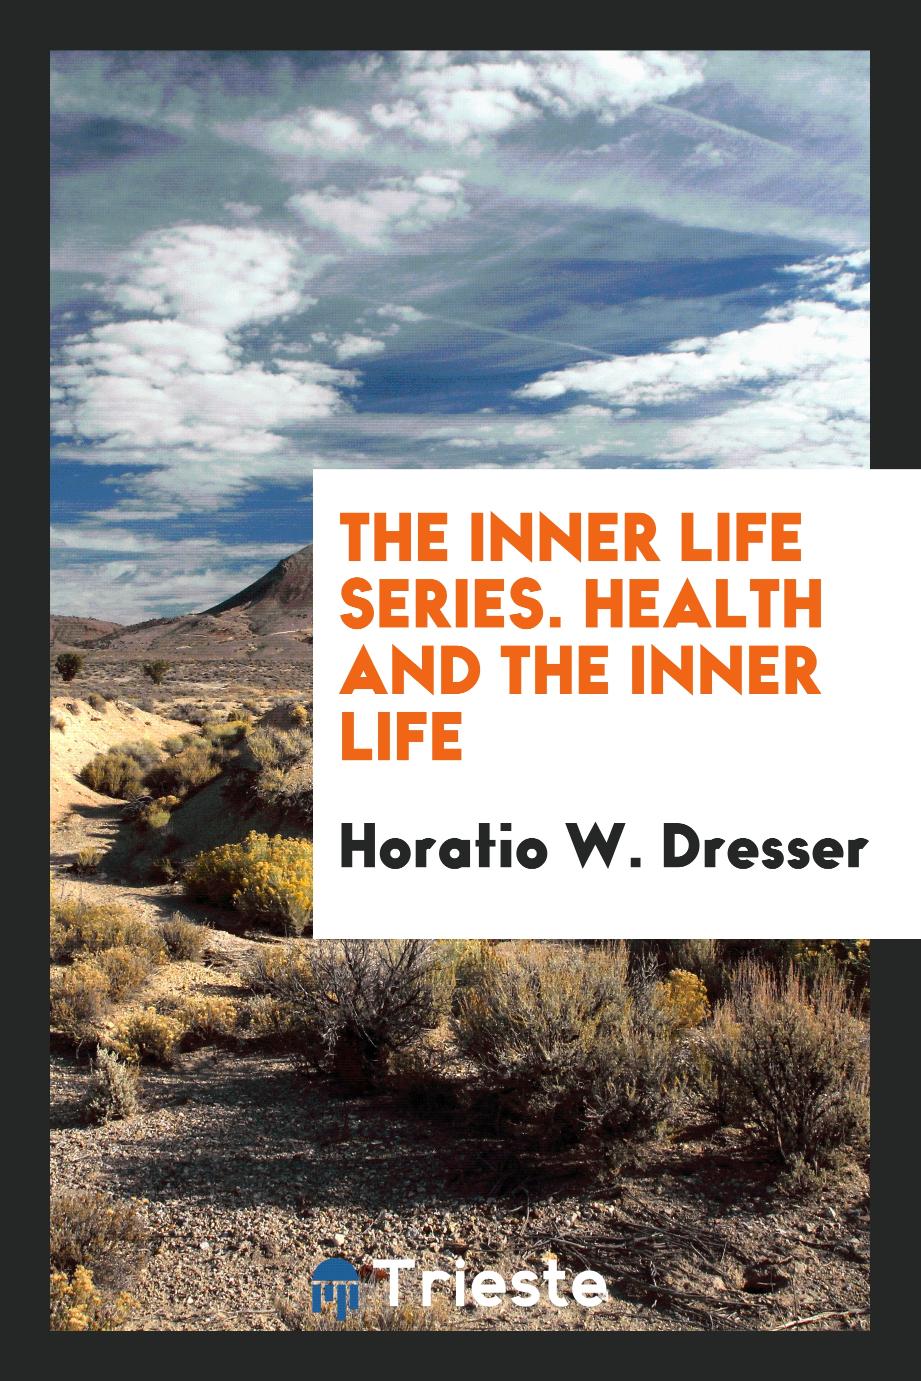 The Inner Life Series. Health and the Inner Life